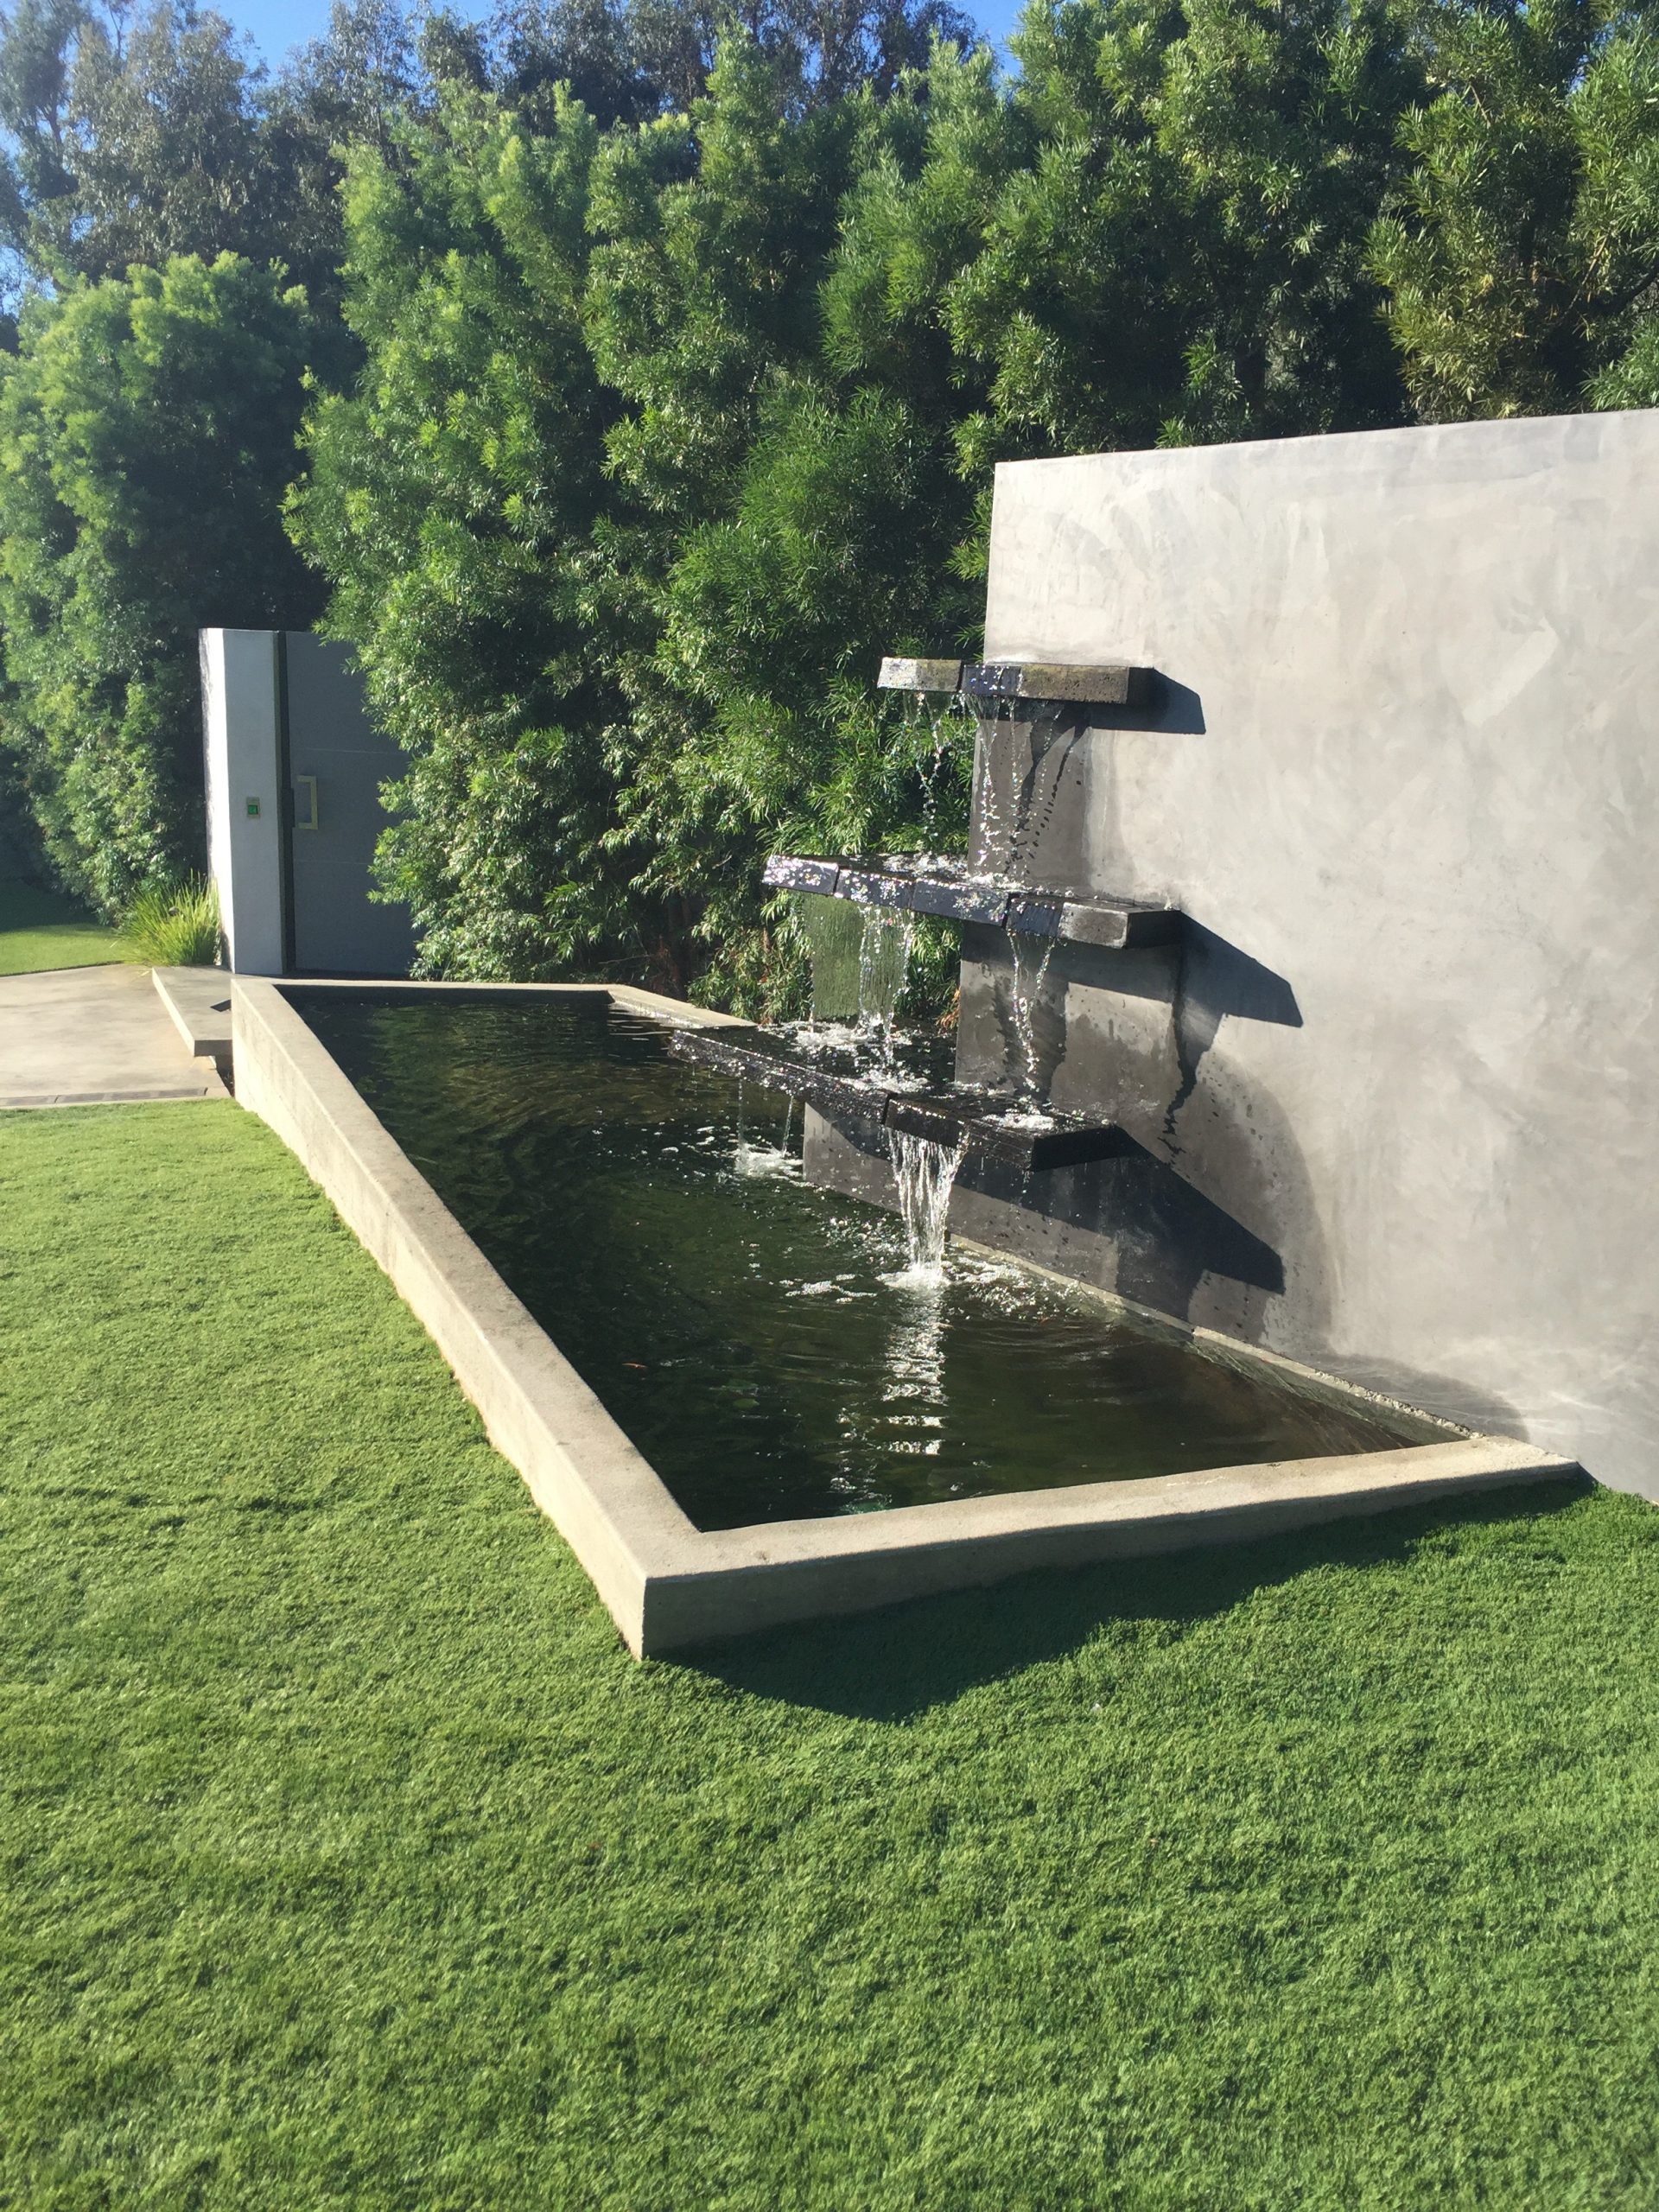 One of a Kind Pond Construction and Water Features That Improve Property Looks